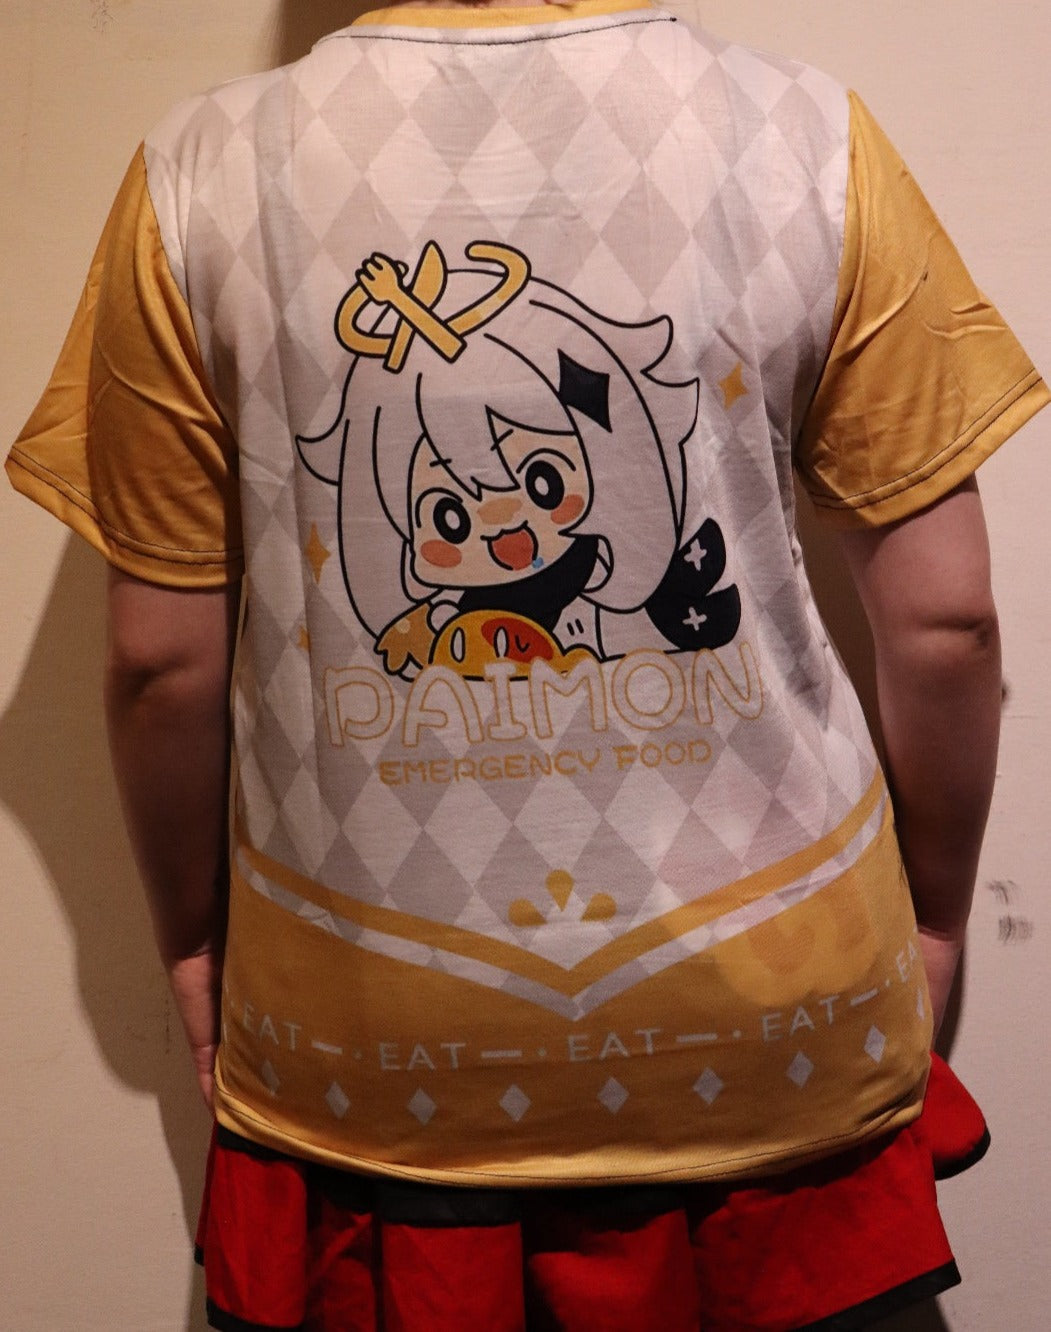 Genshin Impact - Paimon TShirt (Price Does Not Include Shipping - Please Read Description)